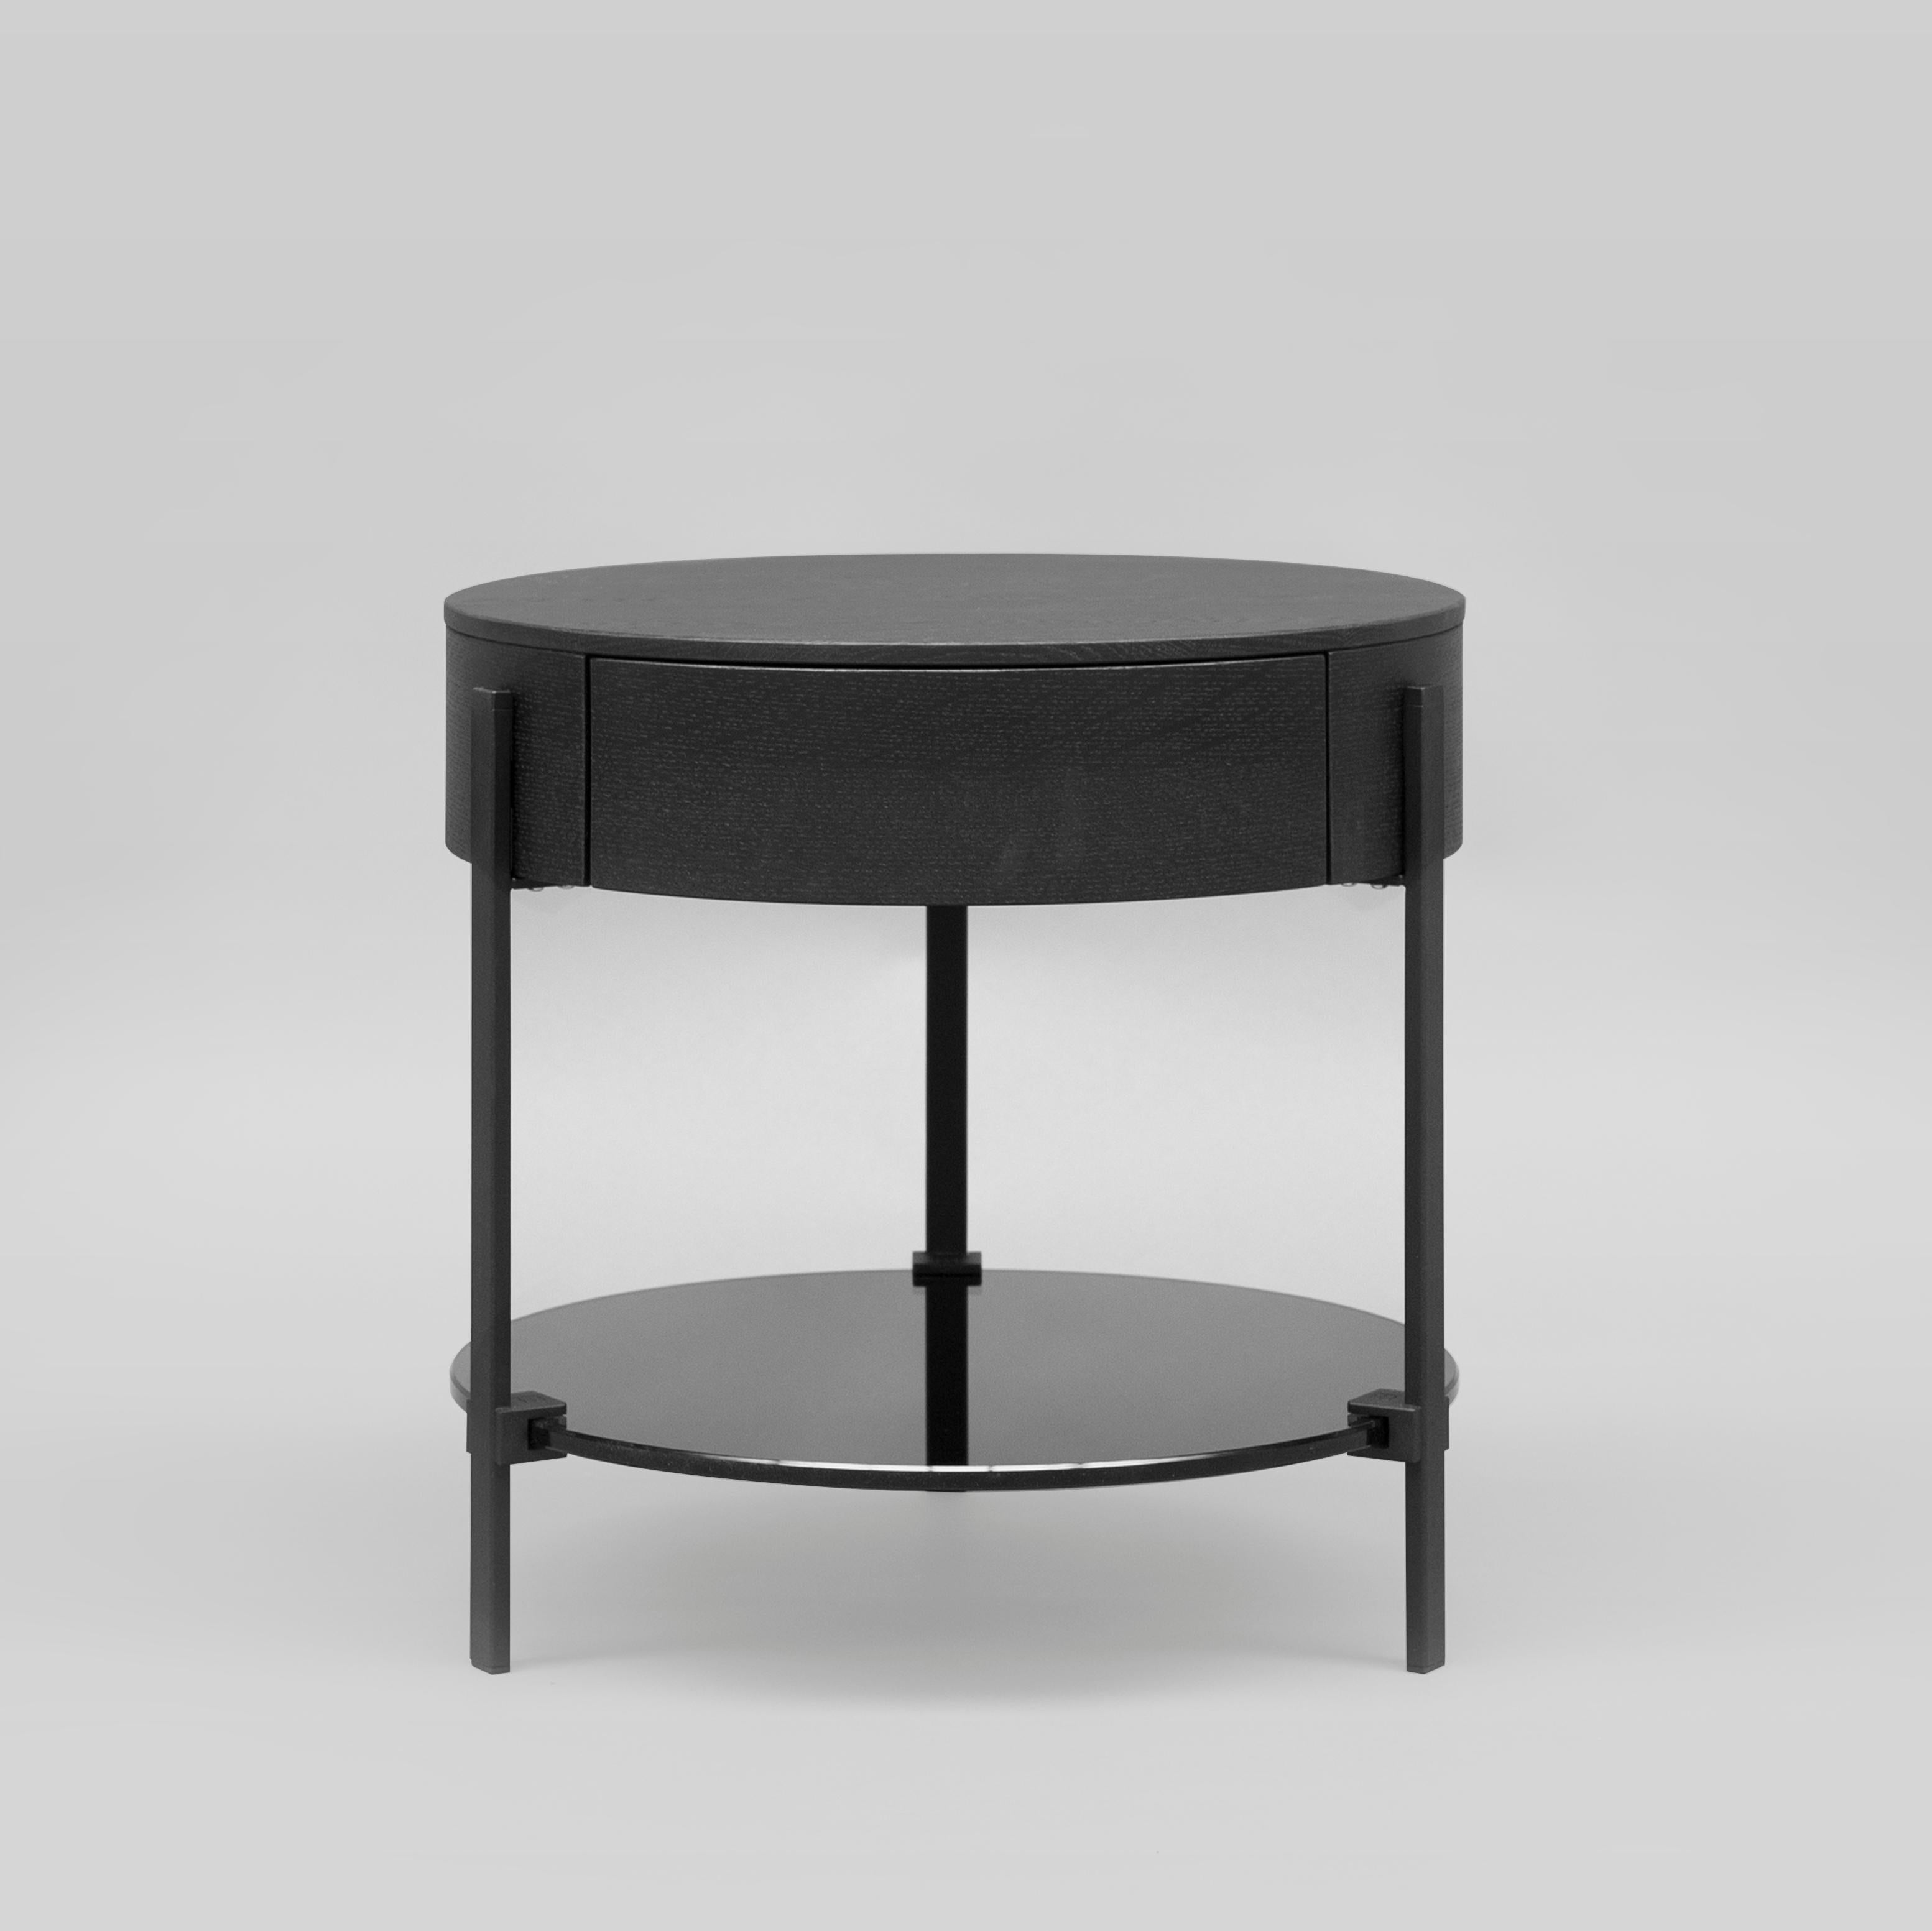 Side table designed by Peter Ghyczy.
Manufactured by Ghyczy (Netherlands)

The T79 is versatile as it is modest. Three stainless steel legs are secured to the glass top by cast metal details. To be ordered in different heights and arranged as